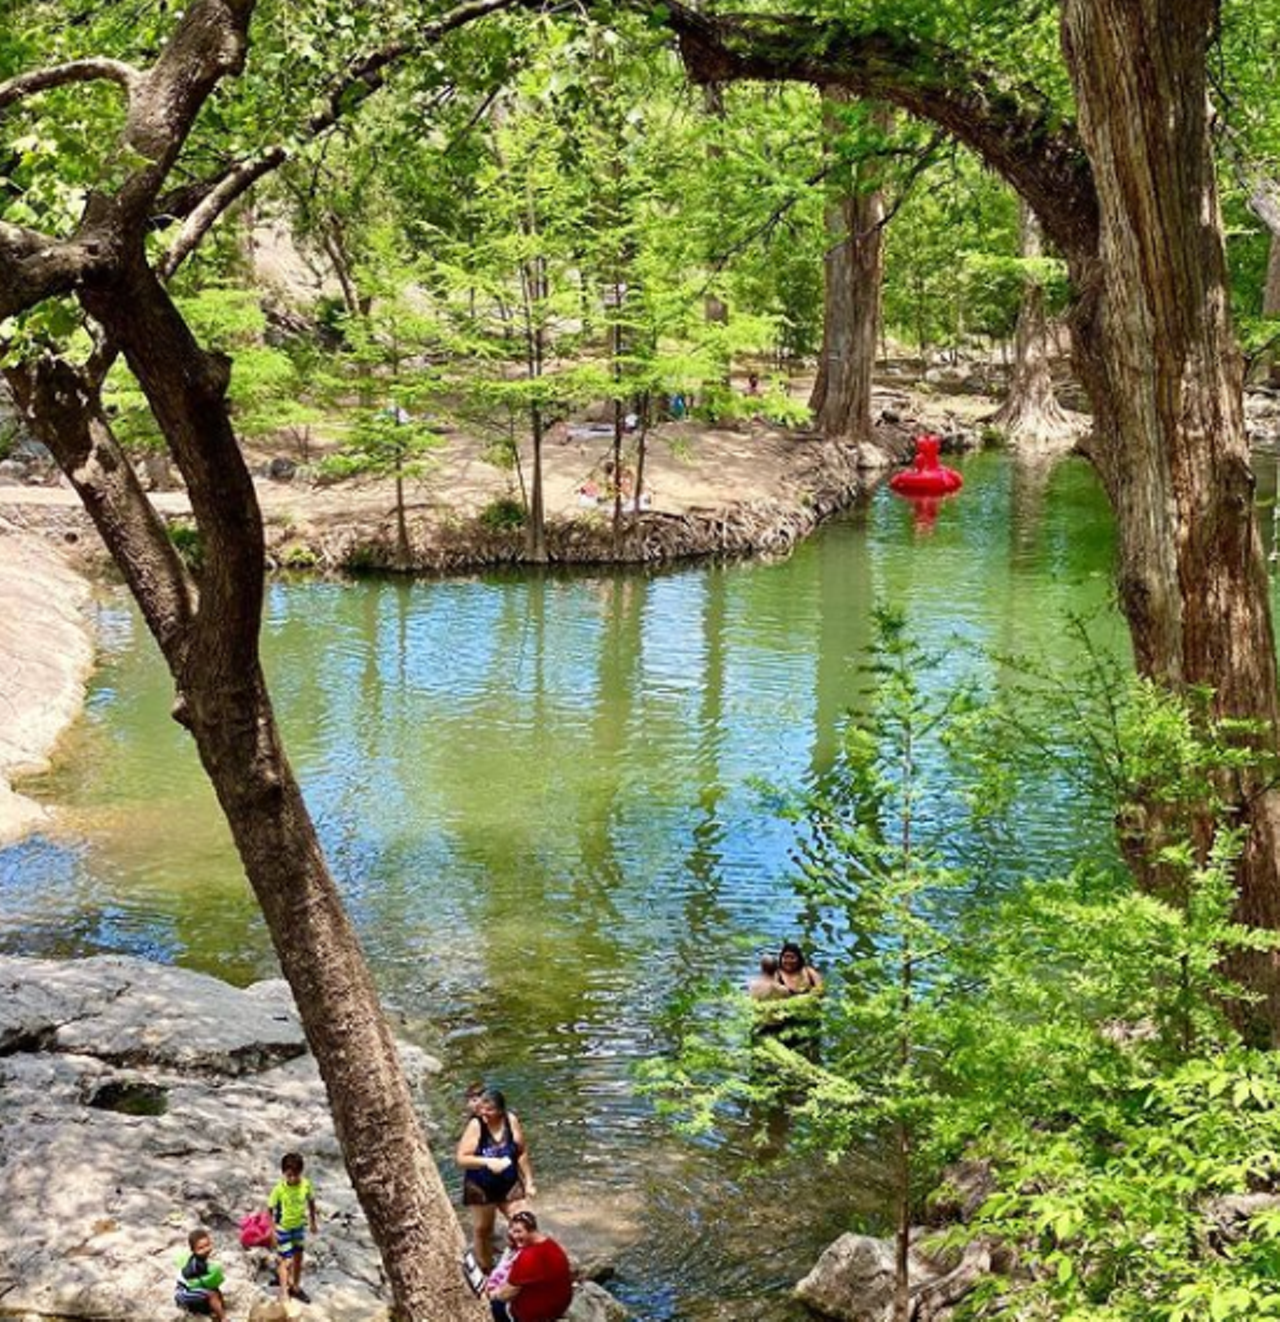 Krause Springs
404 Krause Springs Rd, Spicewood, (401) 236-7554, krausesprings.net
Thirty-two springs, a natural pool and a spring-fed man-made pool are scattered throughout the 115-acre property, ensuring endless relaxation.
Photo via Instagram / thebishopsofroam